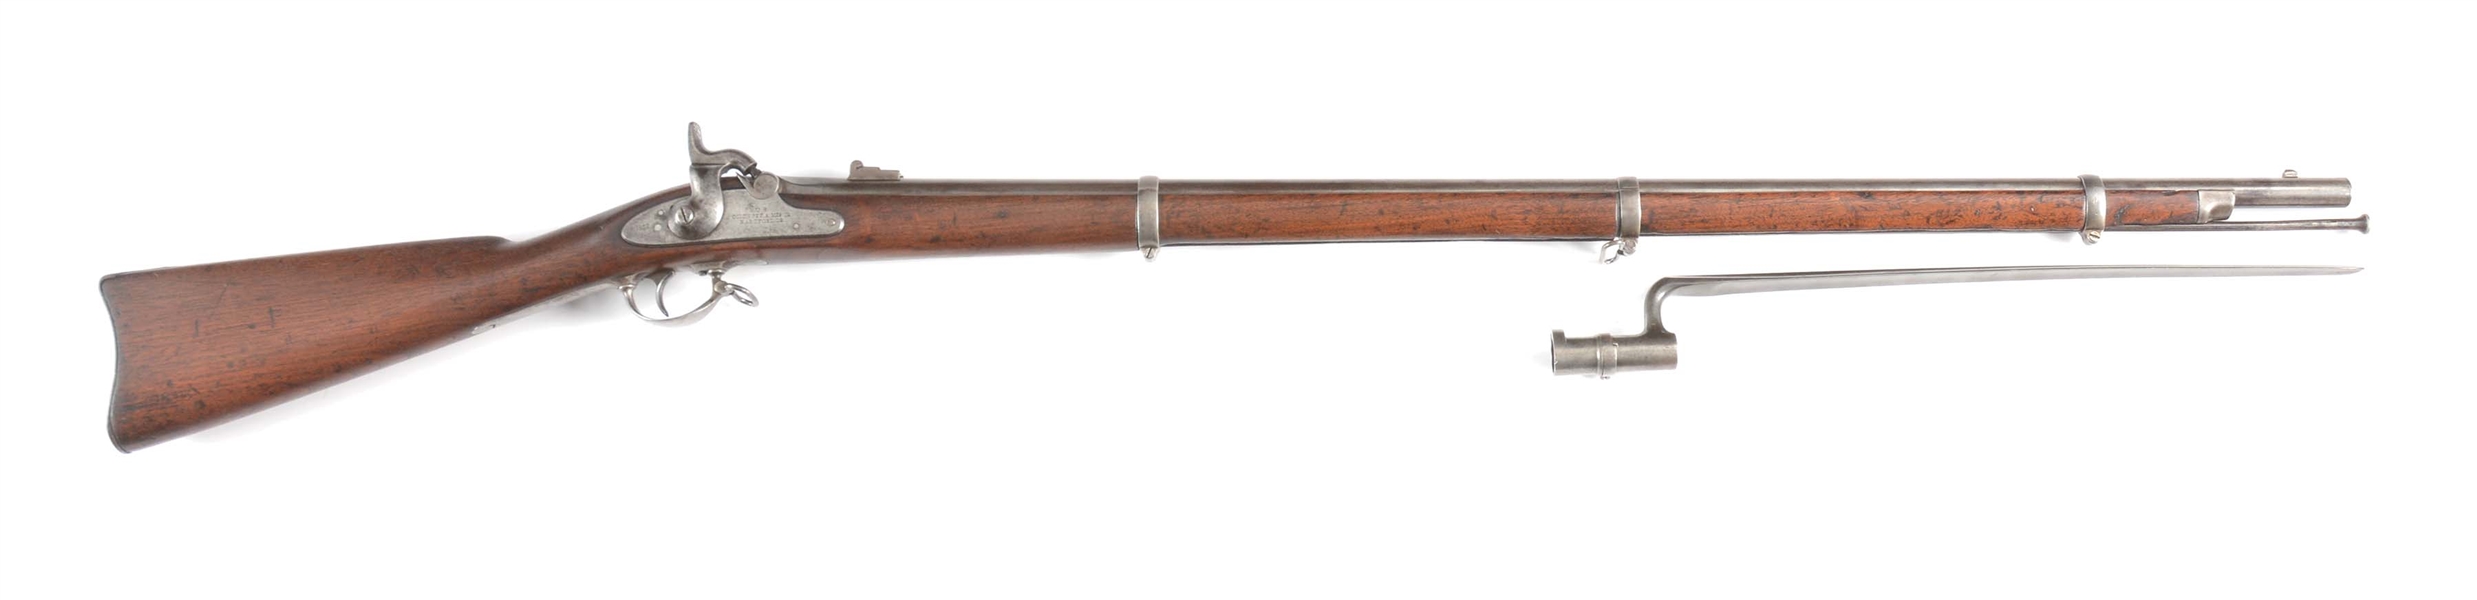 (A) COLT 1861 PERCUSSION RIFLE WITH BAYONET.